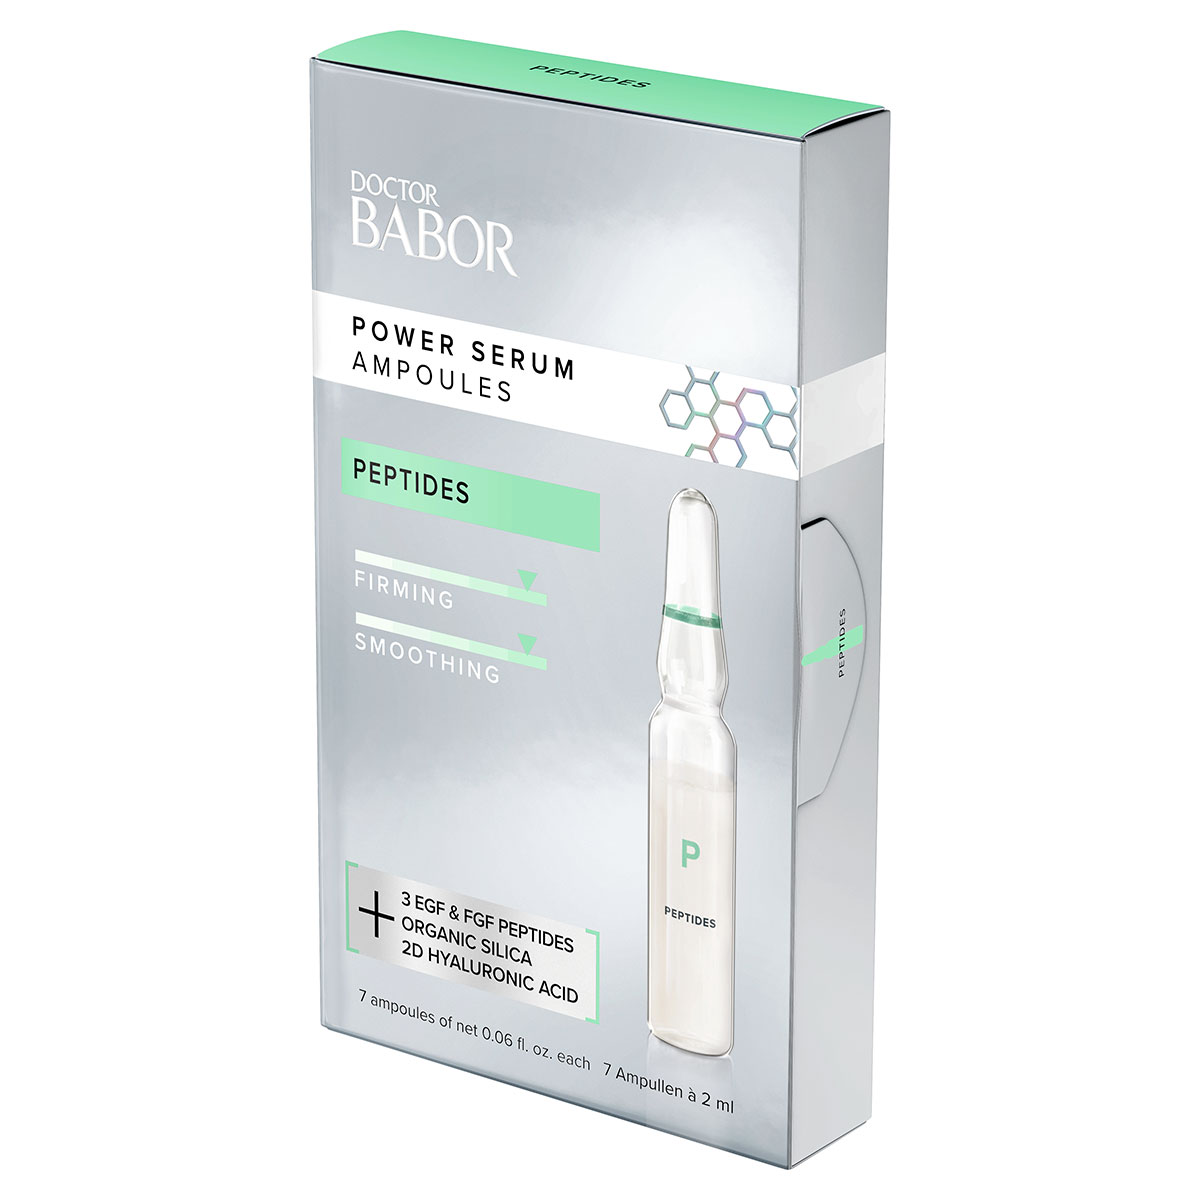 Ампулы с Пептидами DOCTOR BABOR/Power Serum Ampoules Peptides DOCTOR BABOR BABOR Ампулы с Пептидами DOCTOR BABOR/Power Serum Ampoules Peptides DOCTOR BABOR - фото 2